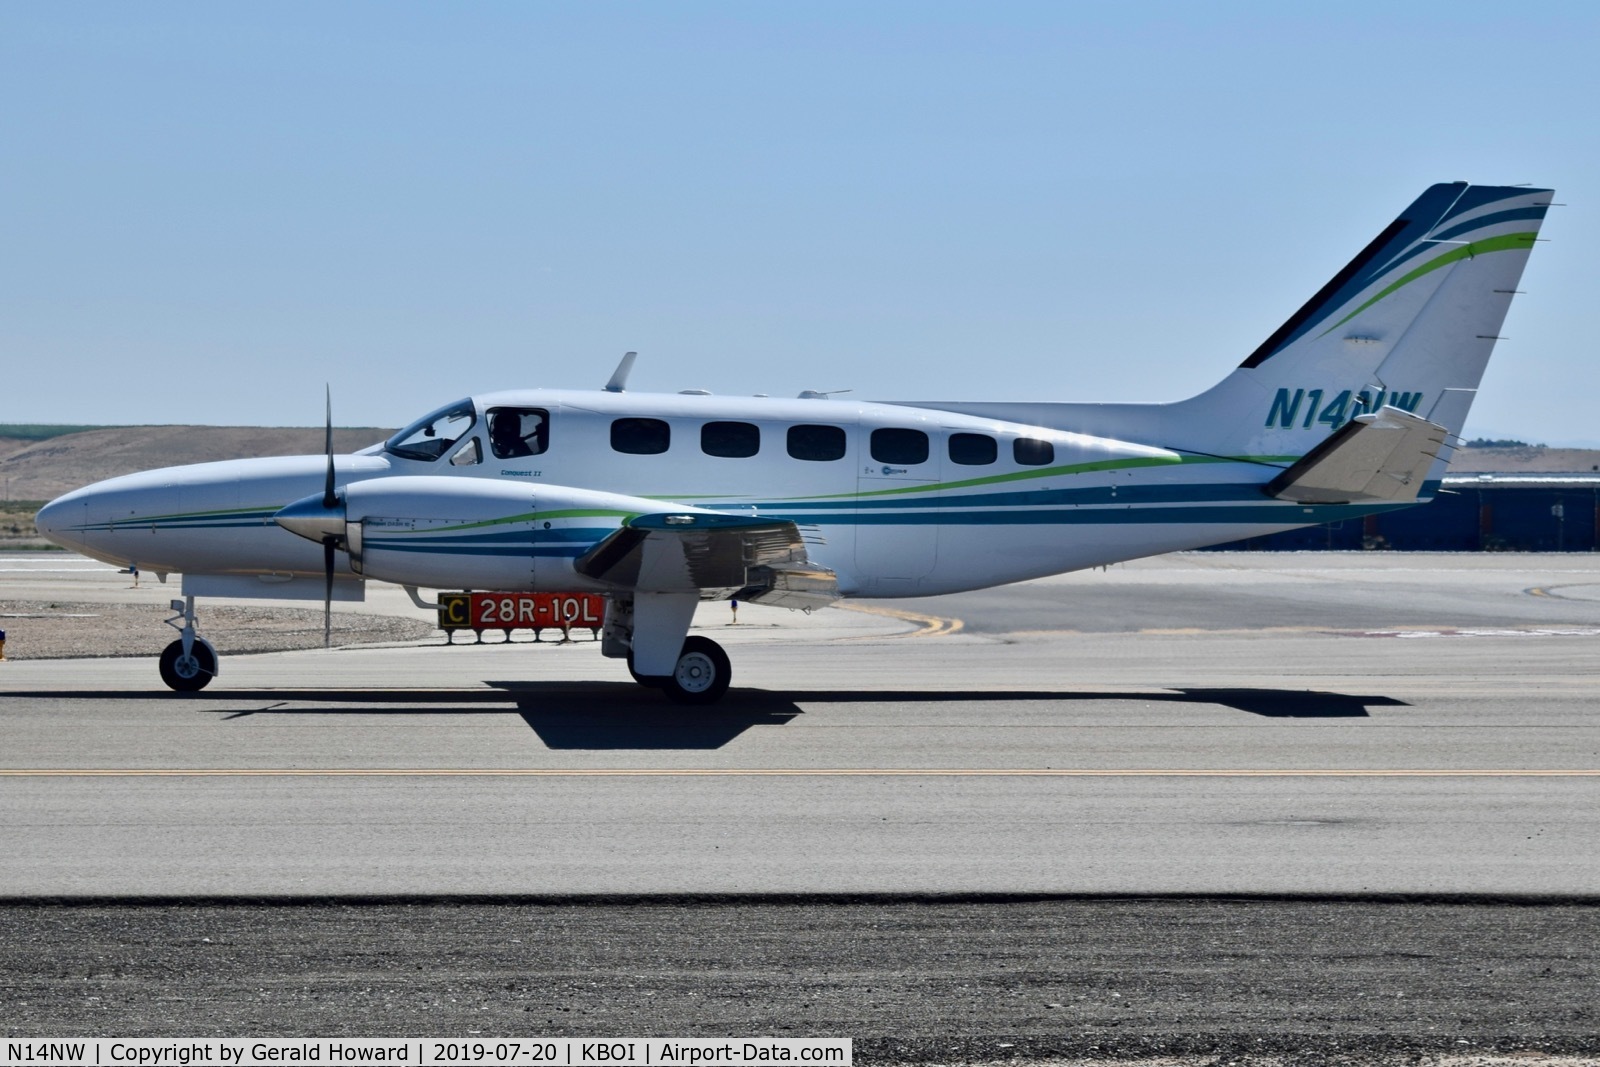 N14NW, 1980 Cessna 441 Conquest II C/N 441-0171, Taxiing on Alpha.